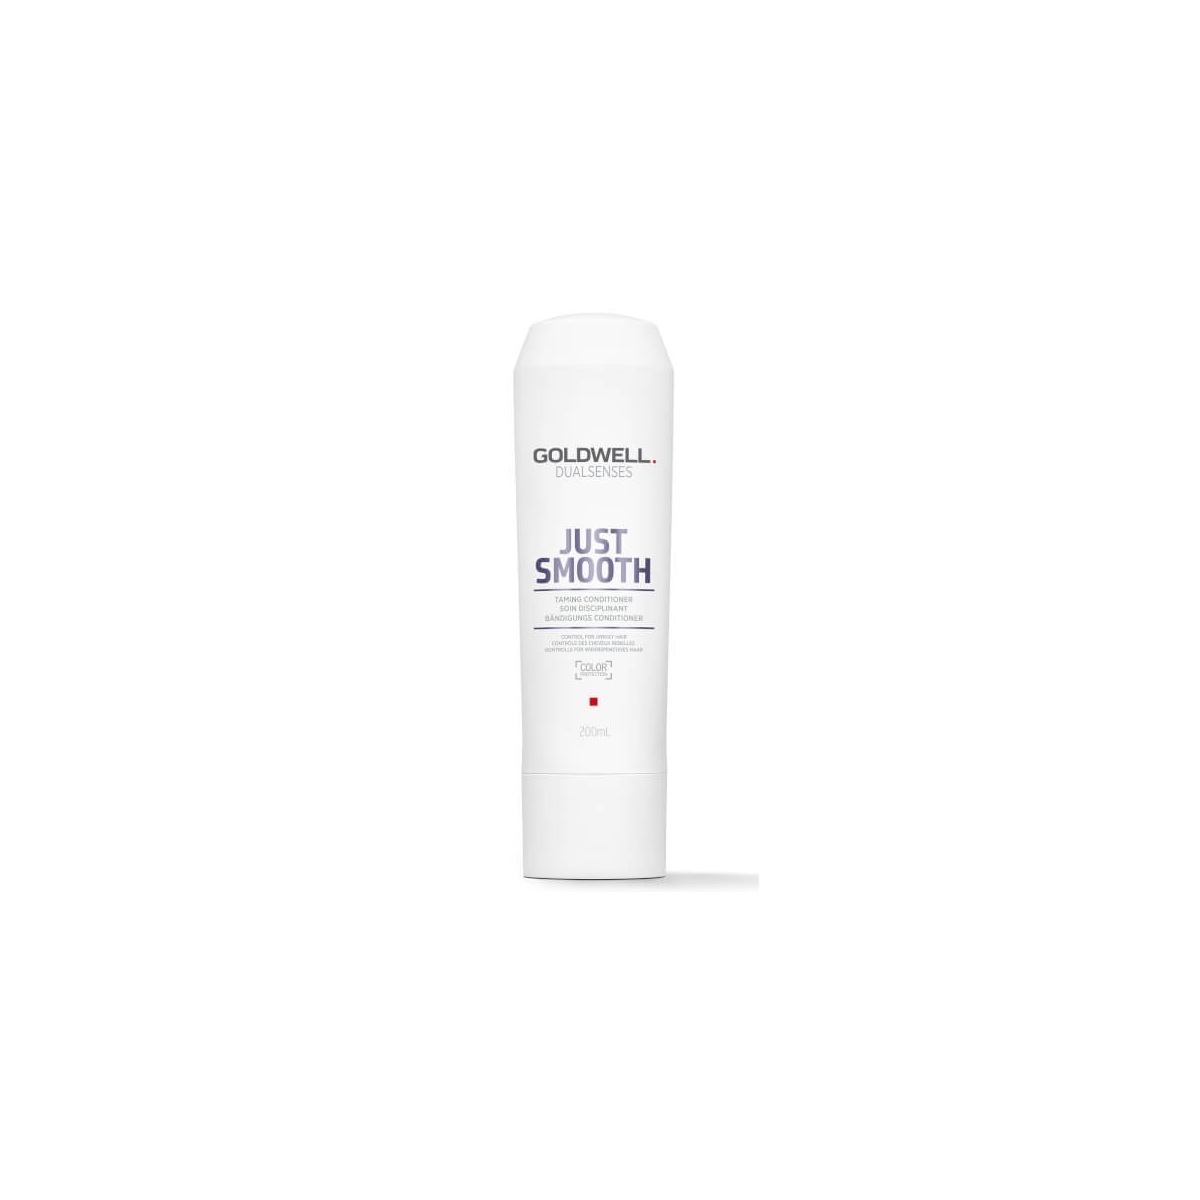 GOLDWELL - DUALSENSES - JUST SMOOTH - TAMING Conditioner (200ml) Balsamo lisciante